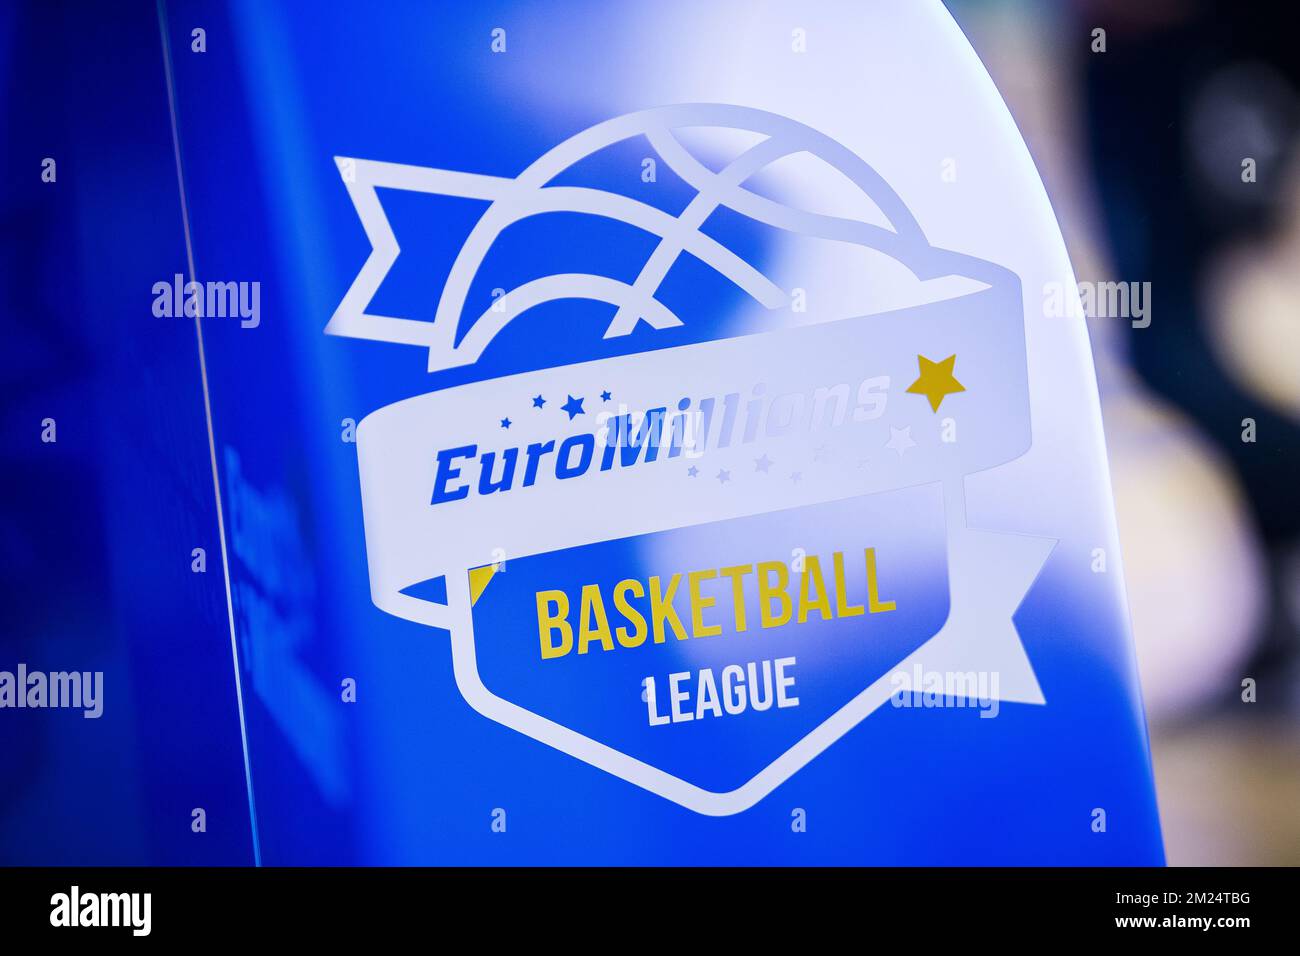 Illustration picture shows the logo of EuroMillions at the basketball game  between Okapi Aalstar and BC Oostende, on day 16 of the EuroMillions League  basket competition, on Saturday 28 January 2017 in